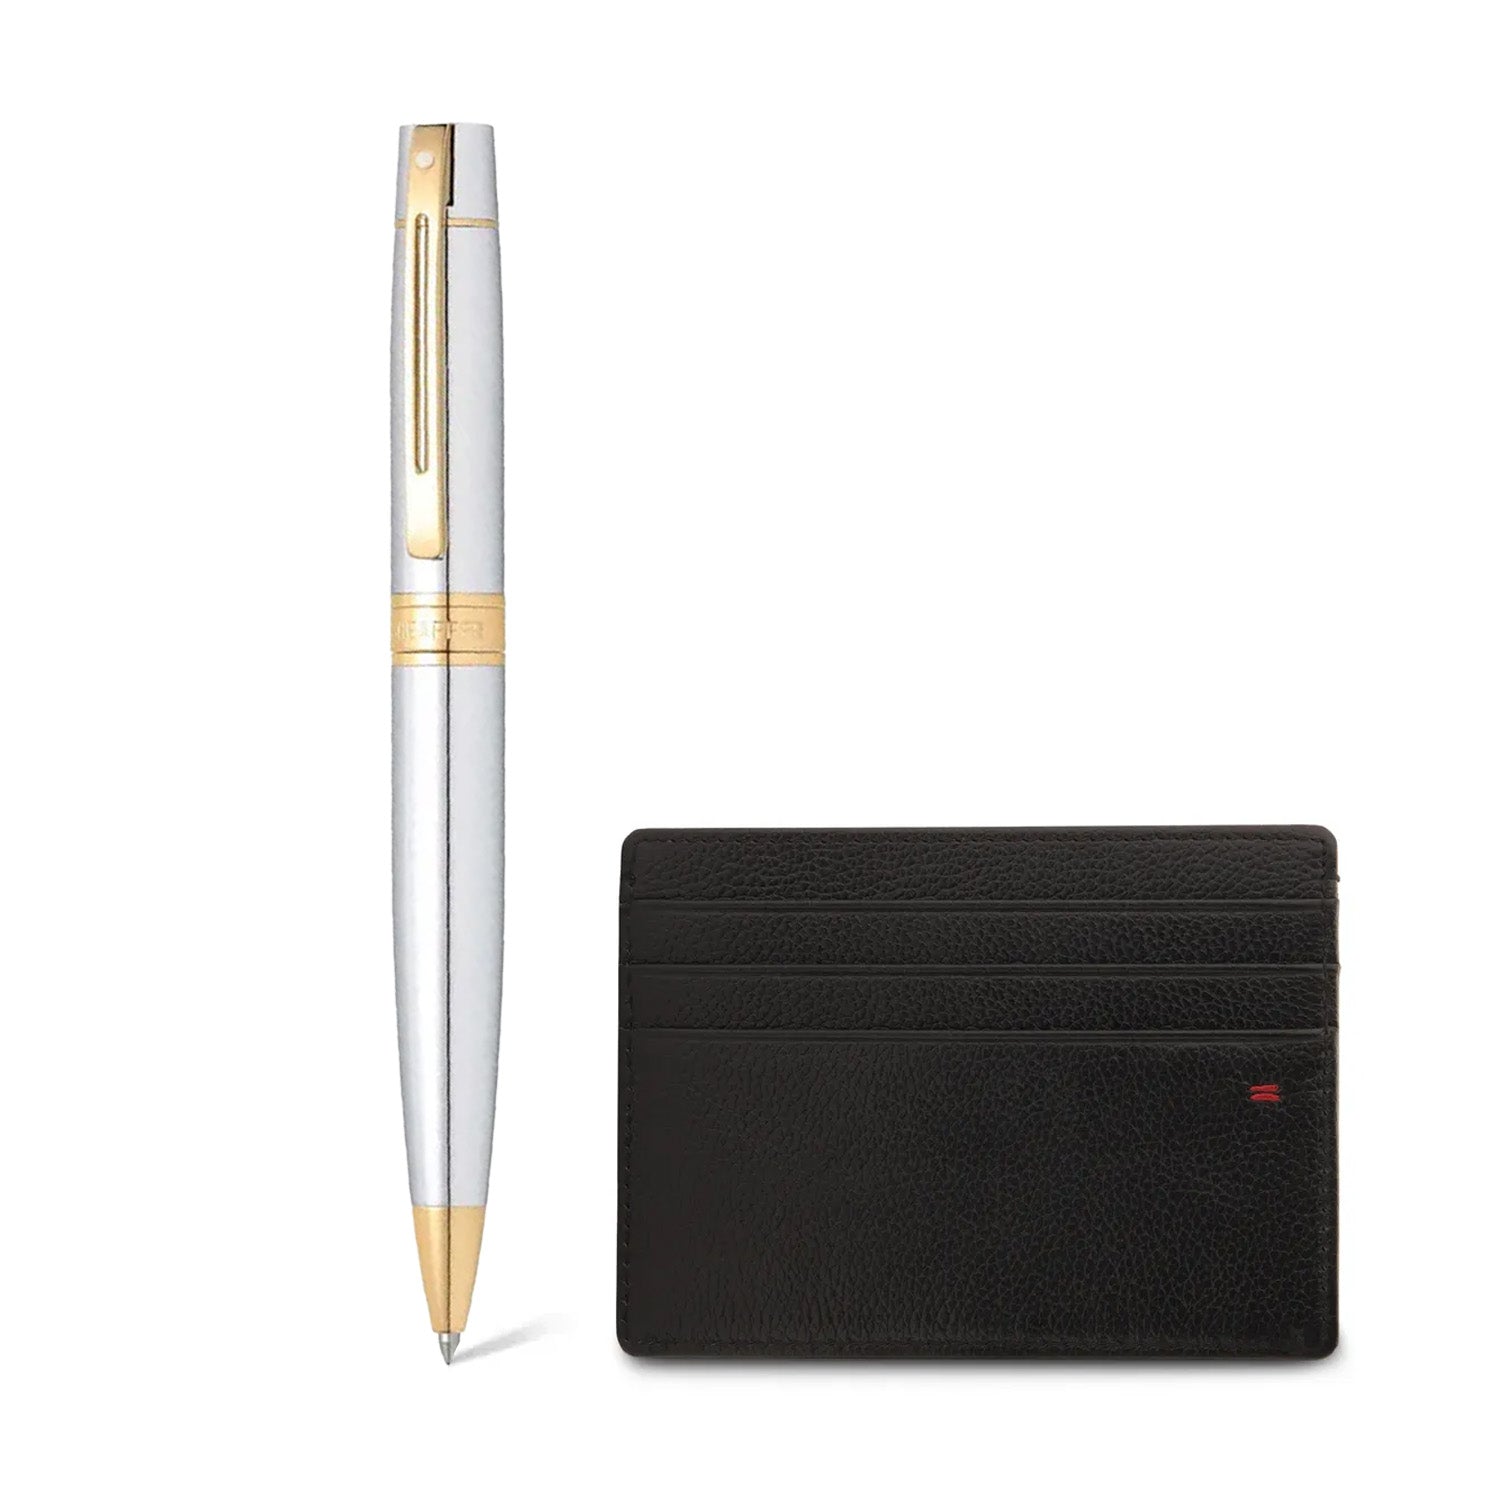 Sheaffer Gift Set ft. Bright Chrome 300 Ballpoint Pen with Gold Trims and Credit Card Holder